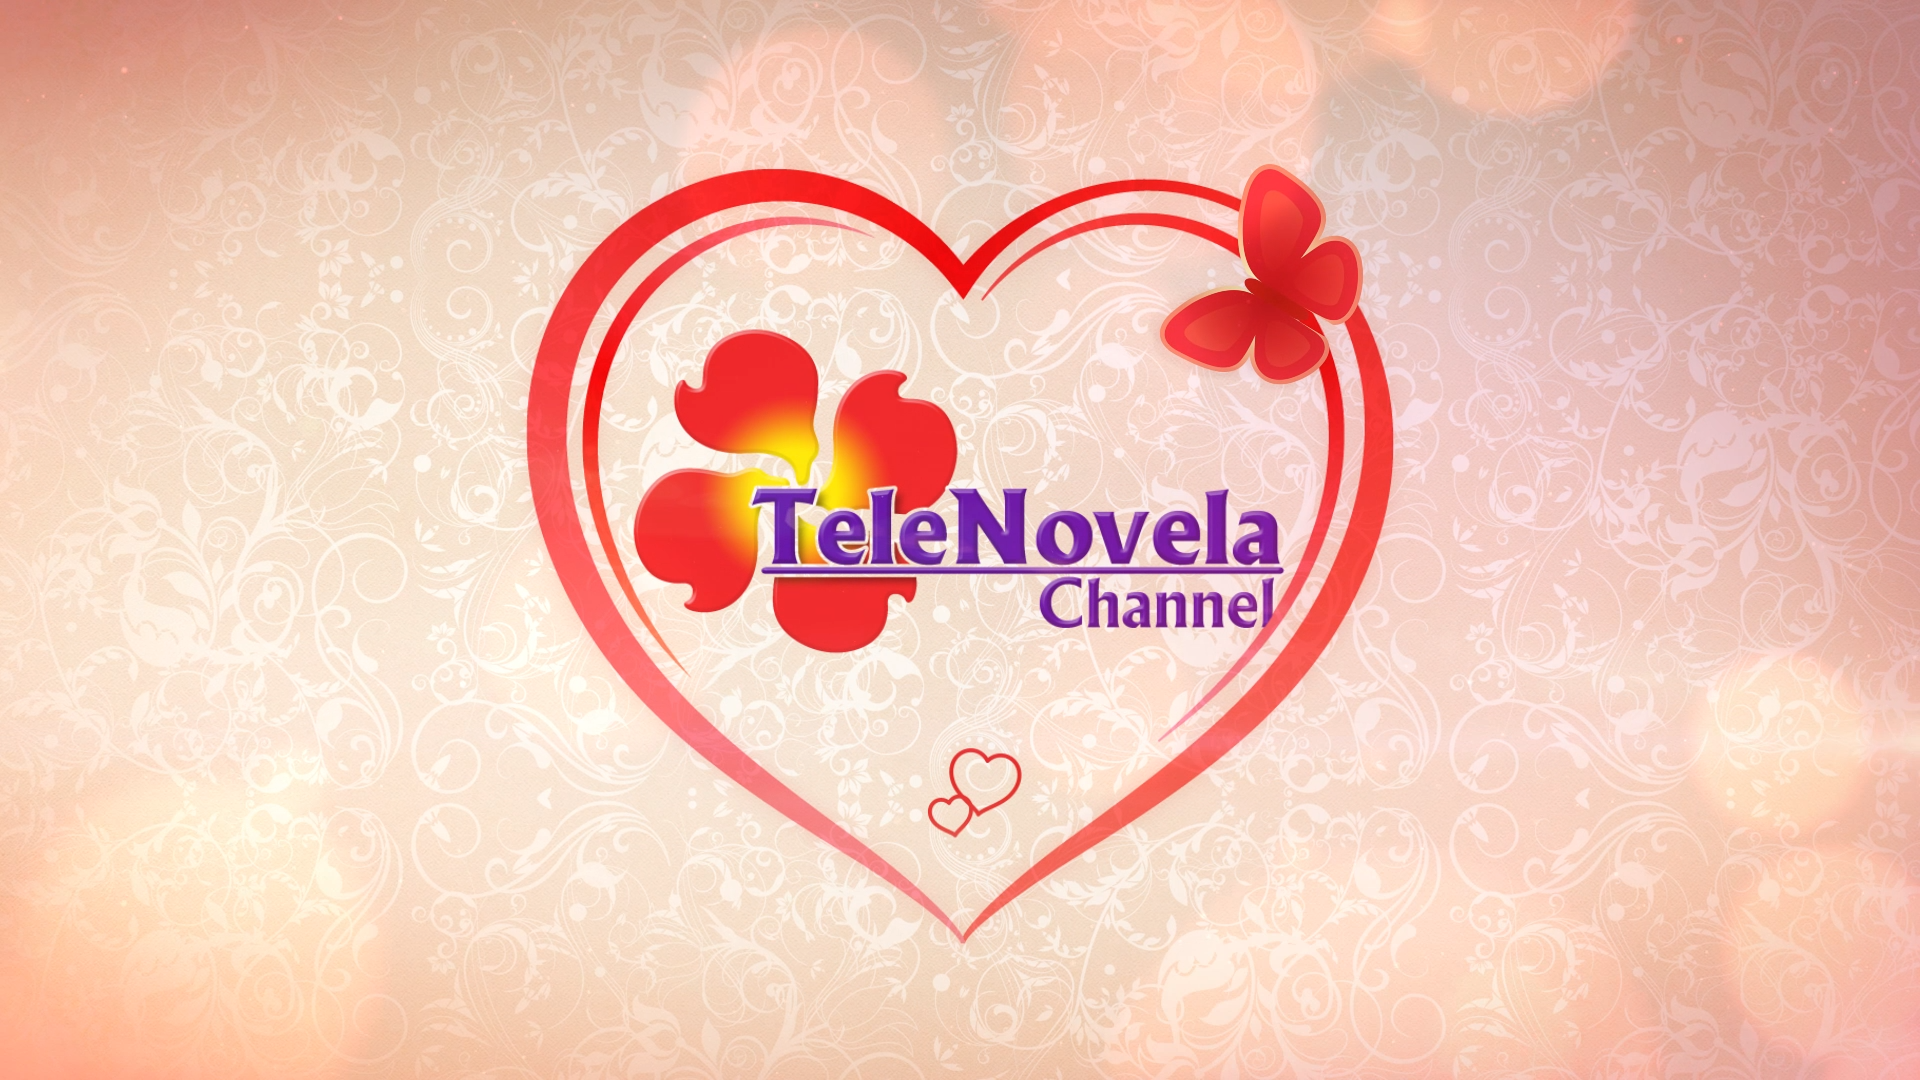 TeleNovela Channel bids farewell after 12 years on air